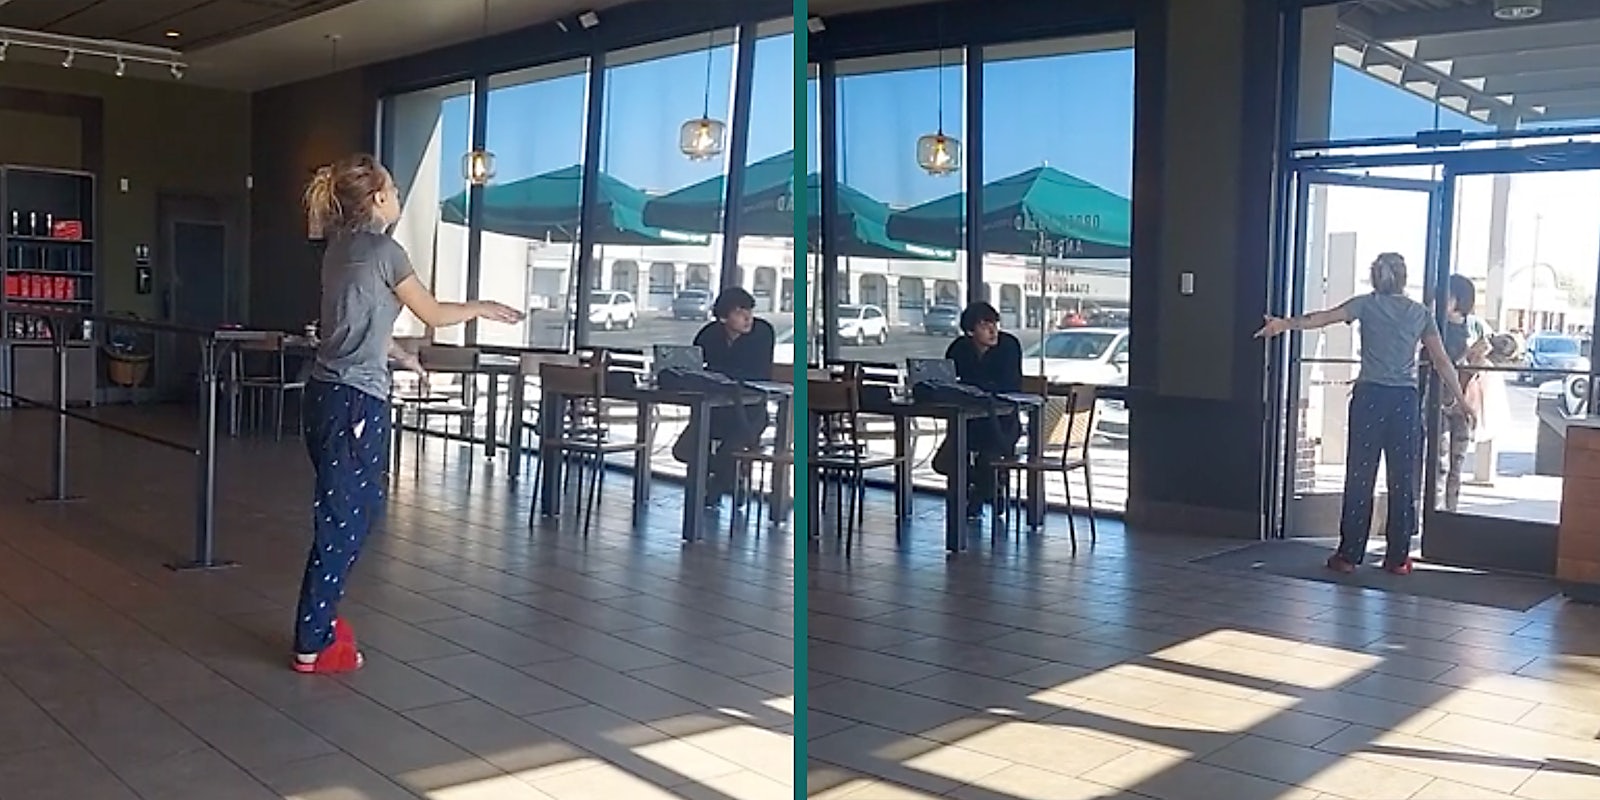 A woman yelling in a Starbucks.